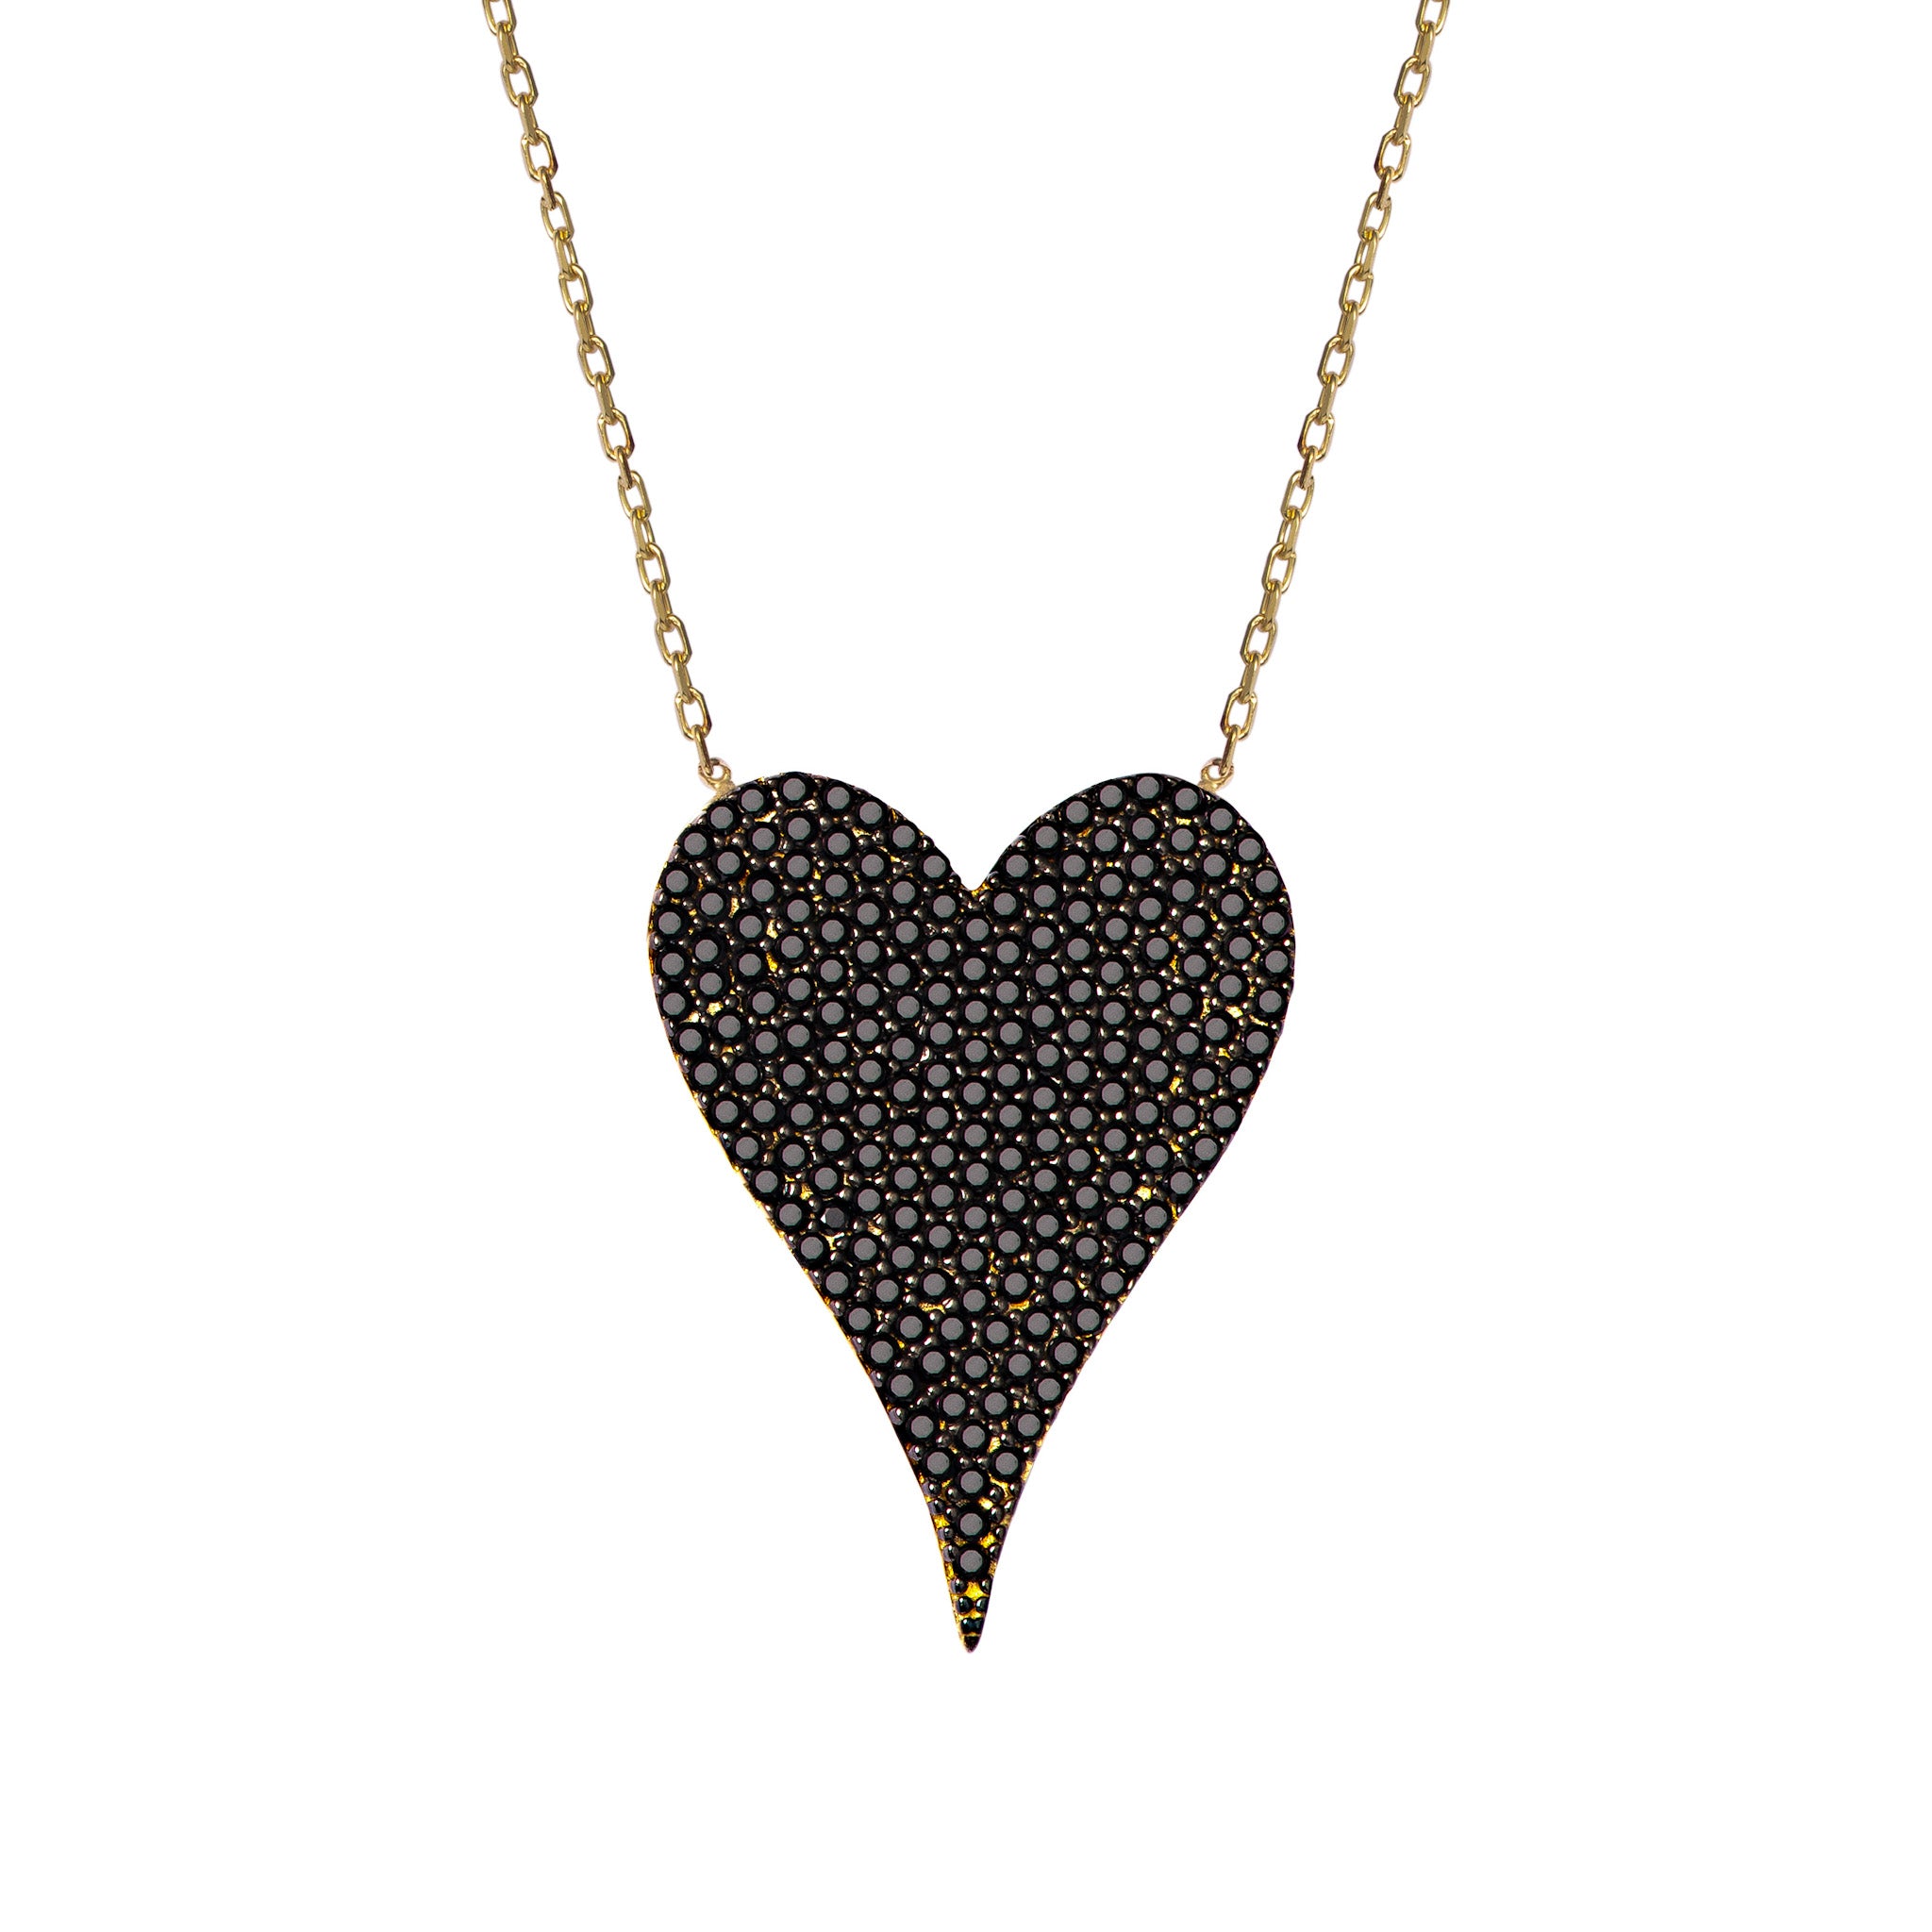 Silver gold plated black “Amore” MEDIUM heart necklace - Free Gift